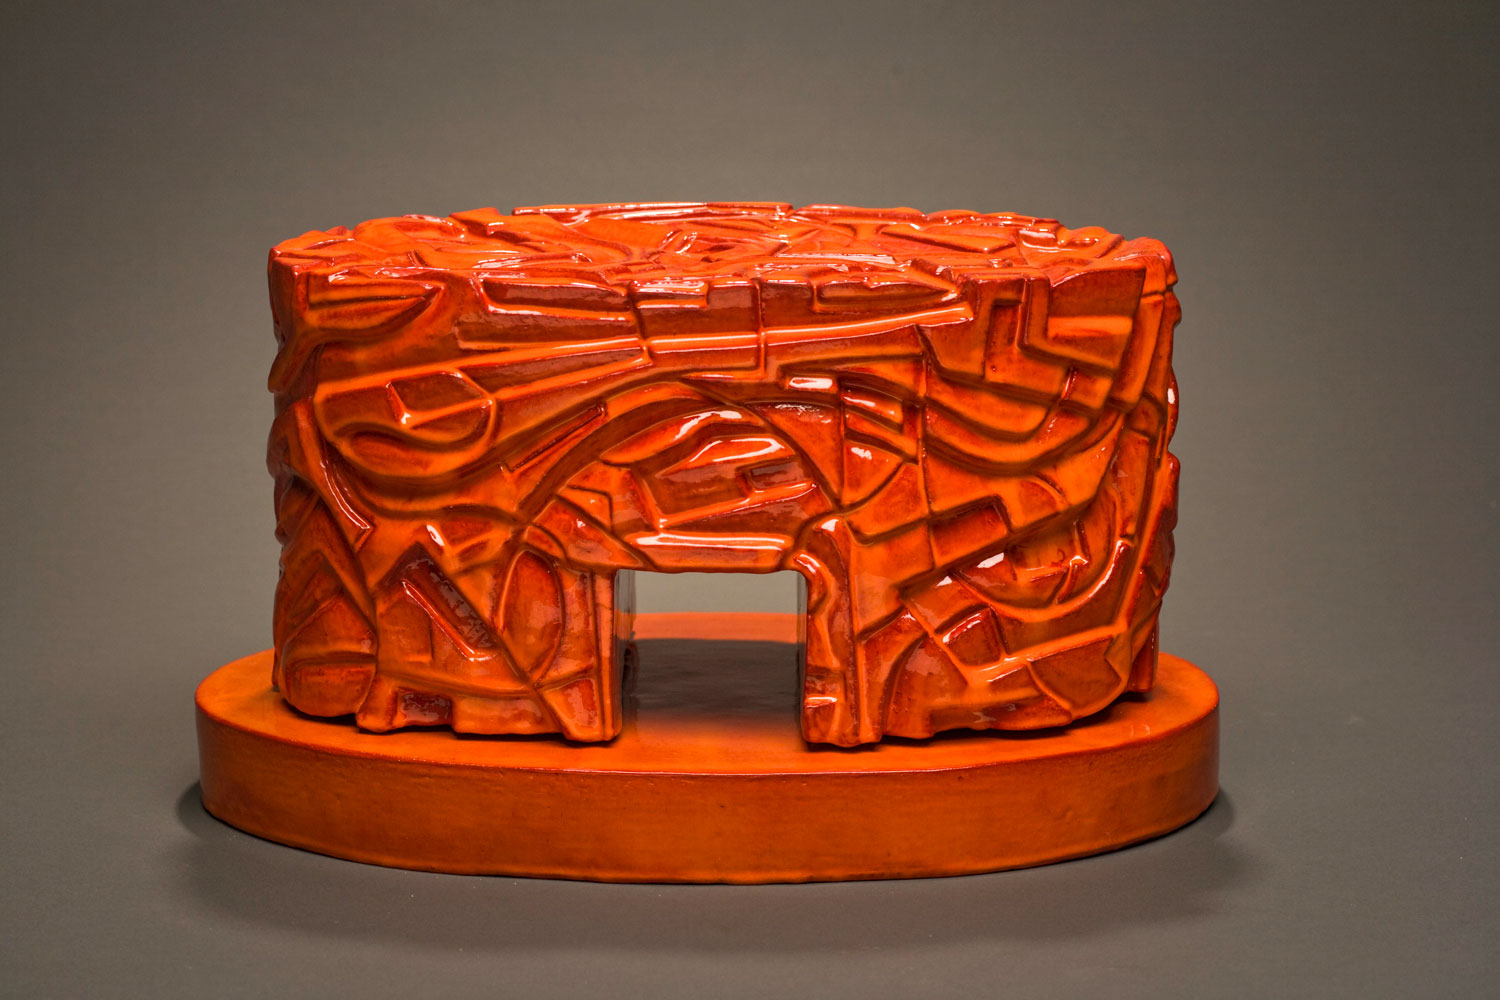 Francisco Jimenez's ceramic sculpture. It is bright red, and very glossy. The sculpture is shaped similar to a cake, but has a tiny square tunnel going through it. The sculpture is on a red disk.